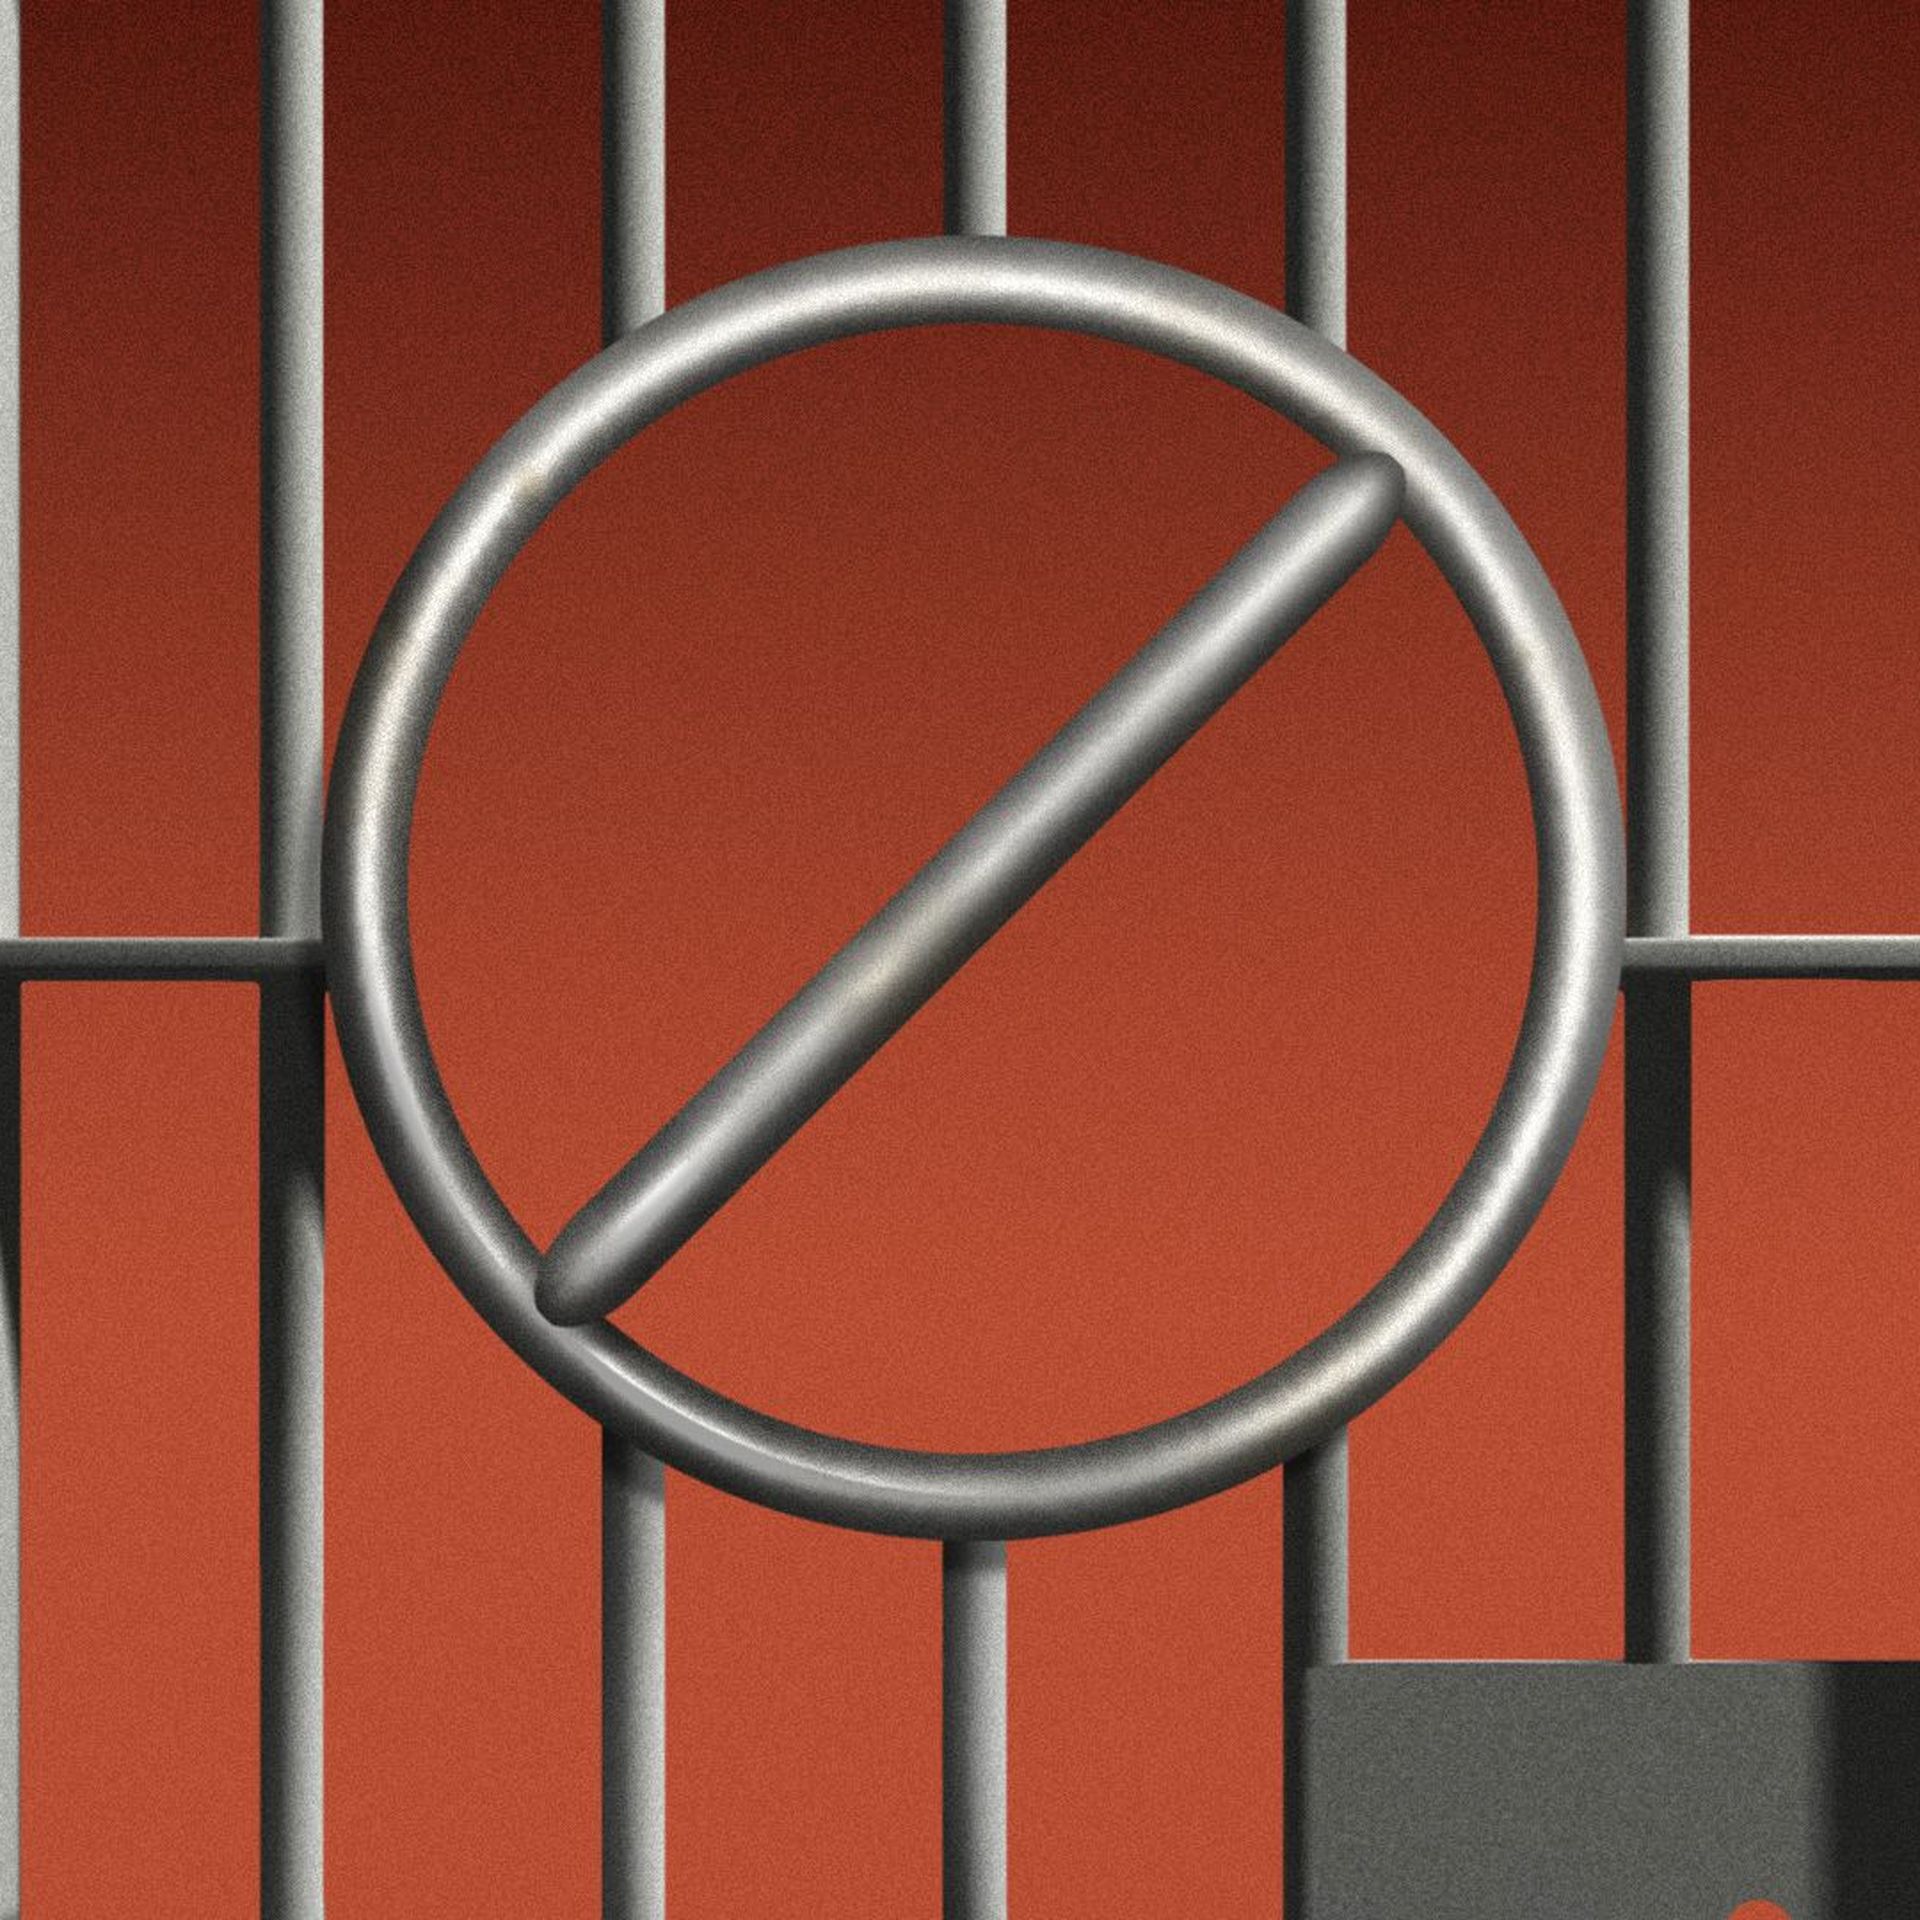 Illustration of the "No" symbol merged with jail cell bars.